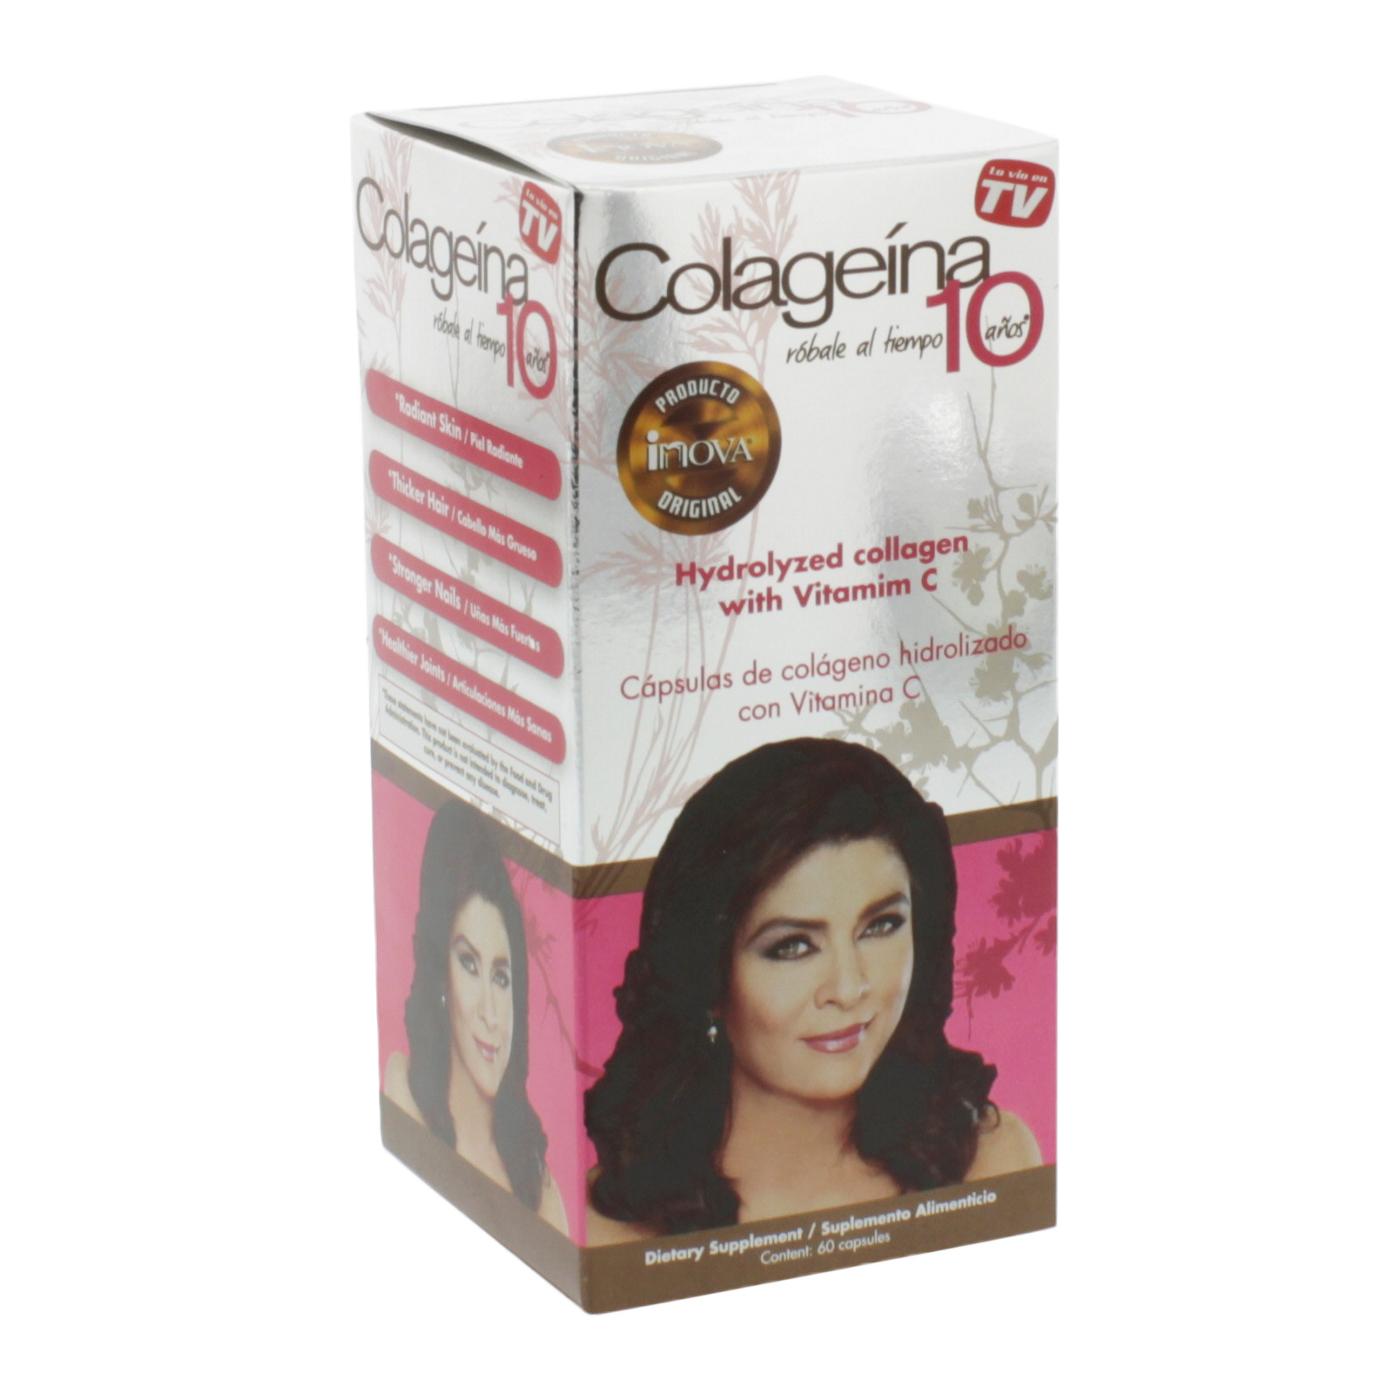 As Seen On TV Colagenia 10 Capsules; image 1 of 2